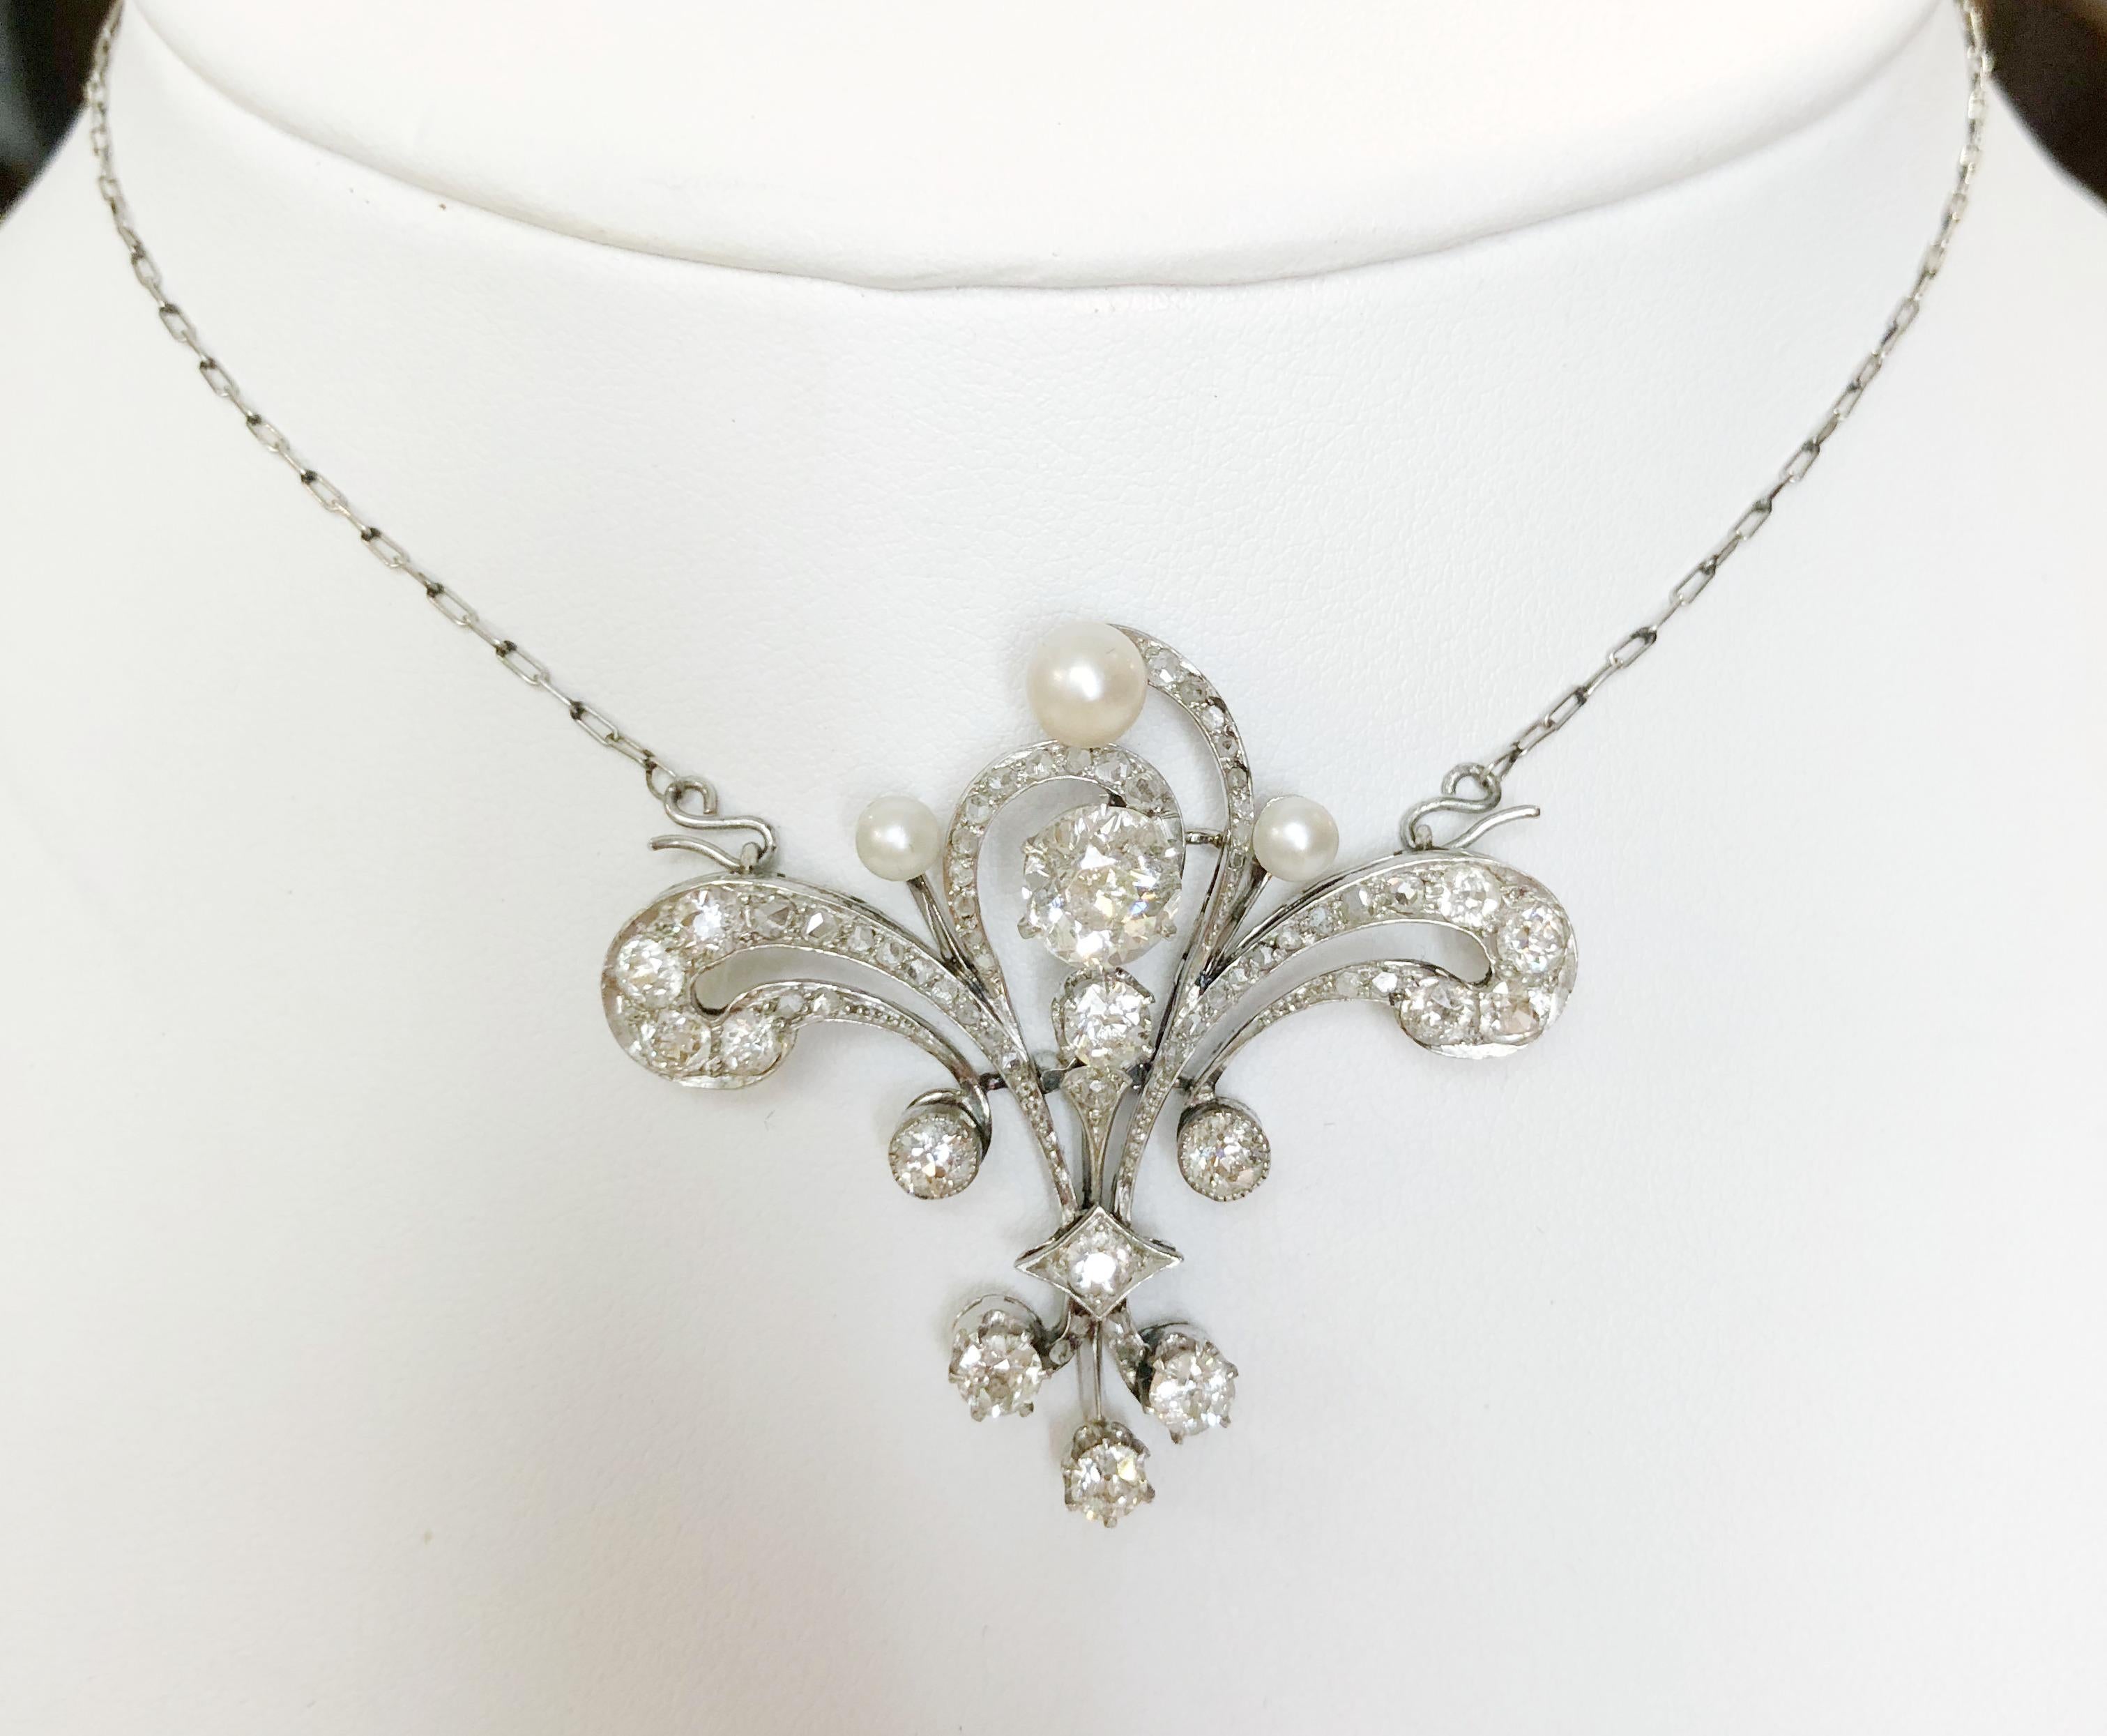 Vintage platinum necklace which also becomes a brooch, with natural pearls and a total 5 karats of diamonds, Italy 1920s.
The large center diamond is 1.75 karats in old-mine cut.
Length 53 cm